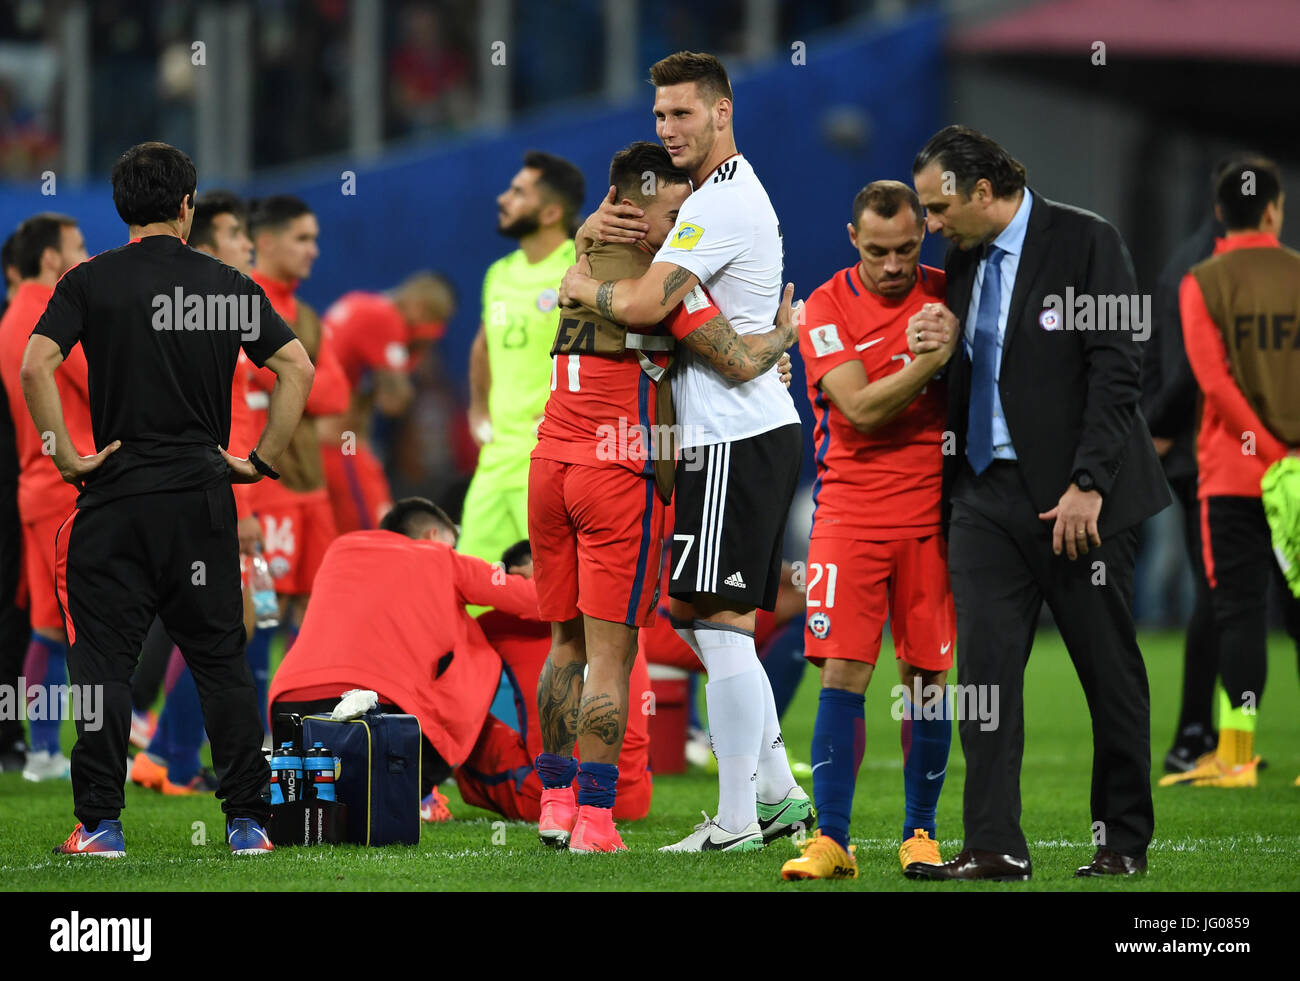 Saint Petersburg, Russia. 2nd July, 2017. Germany's Niklas Suele (M-R) hugs Chile's Eduardo Vargas after the Confederations Cup finale between Chile and Germany at the Saint Petersburg Stadium in Saint Petersburg, Russia, 2 July 2017. Photo: Marius Becker/dpa/Alamy Live News Stock Photo